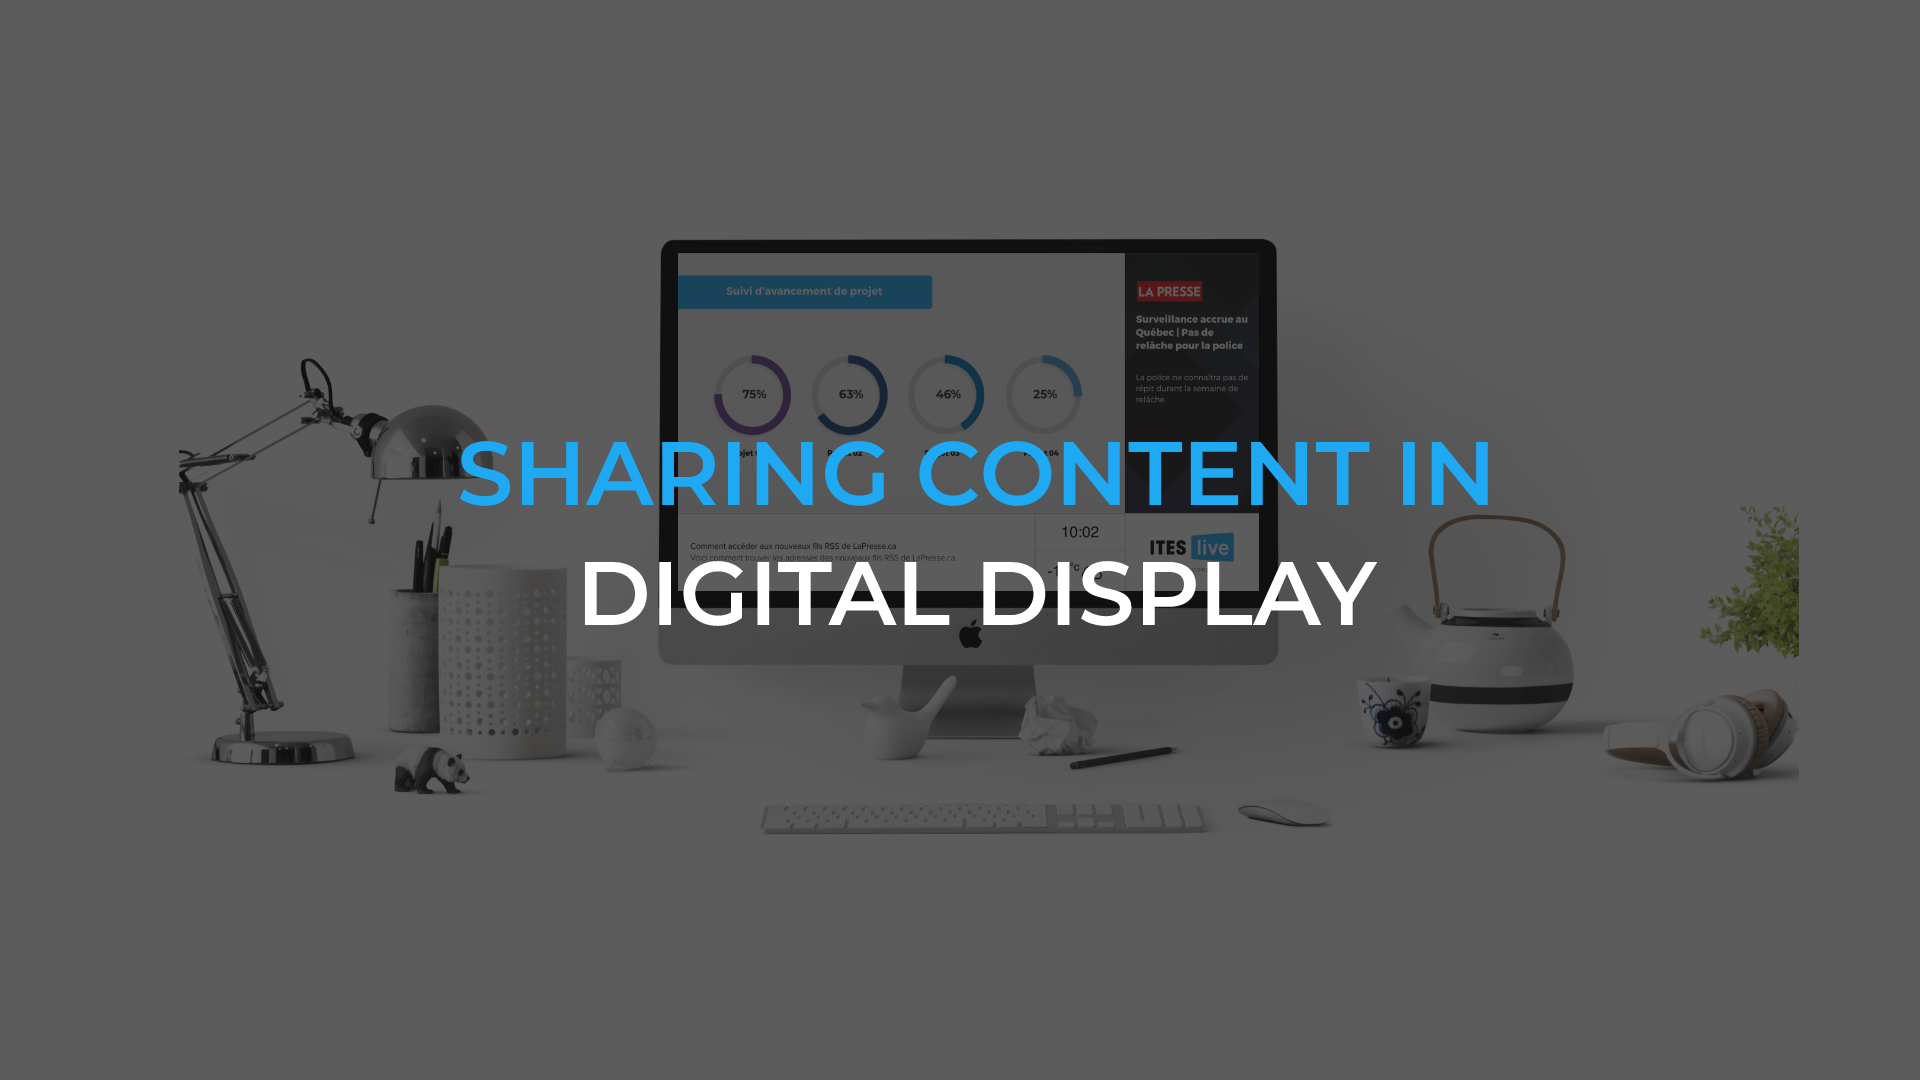 Sharing content in digital displays through the Web